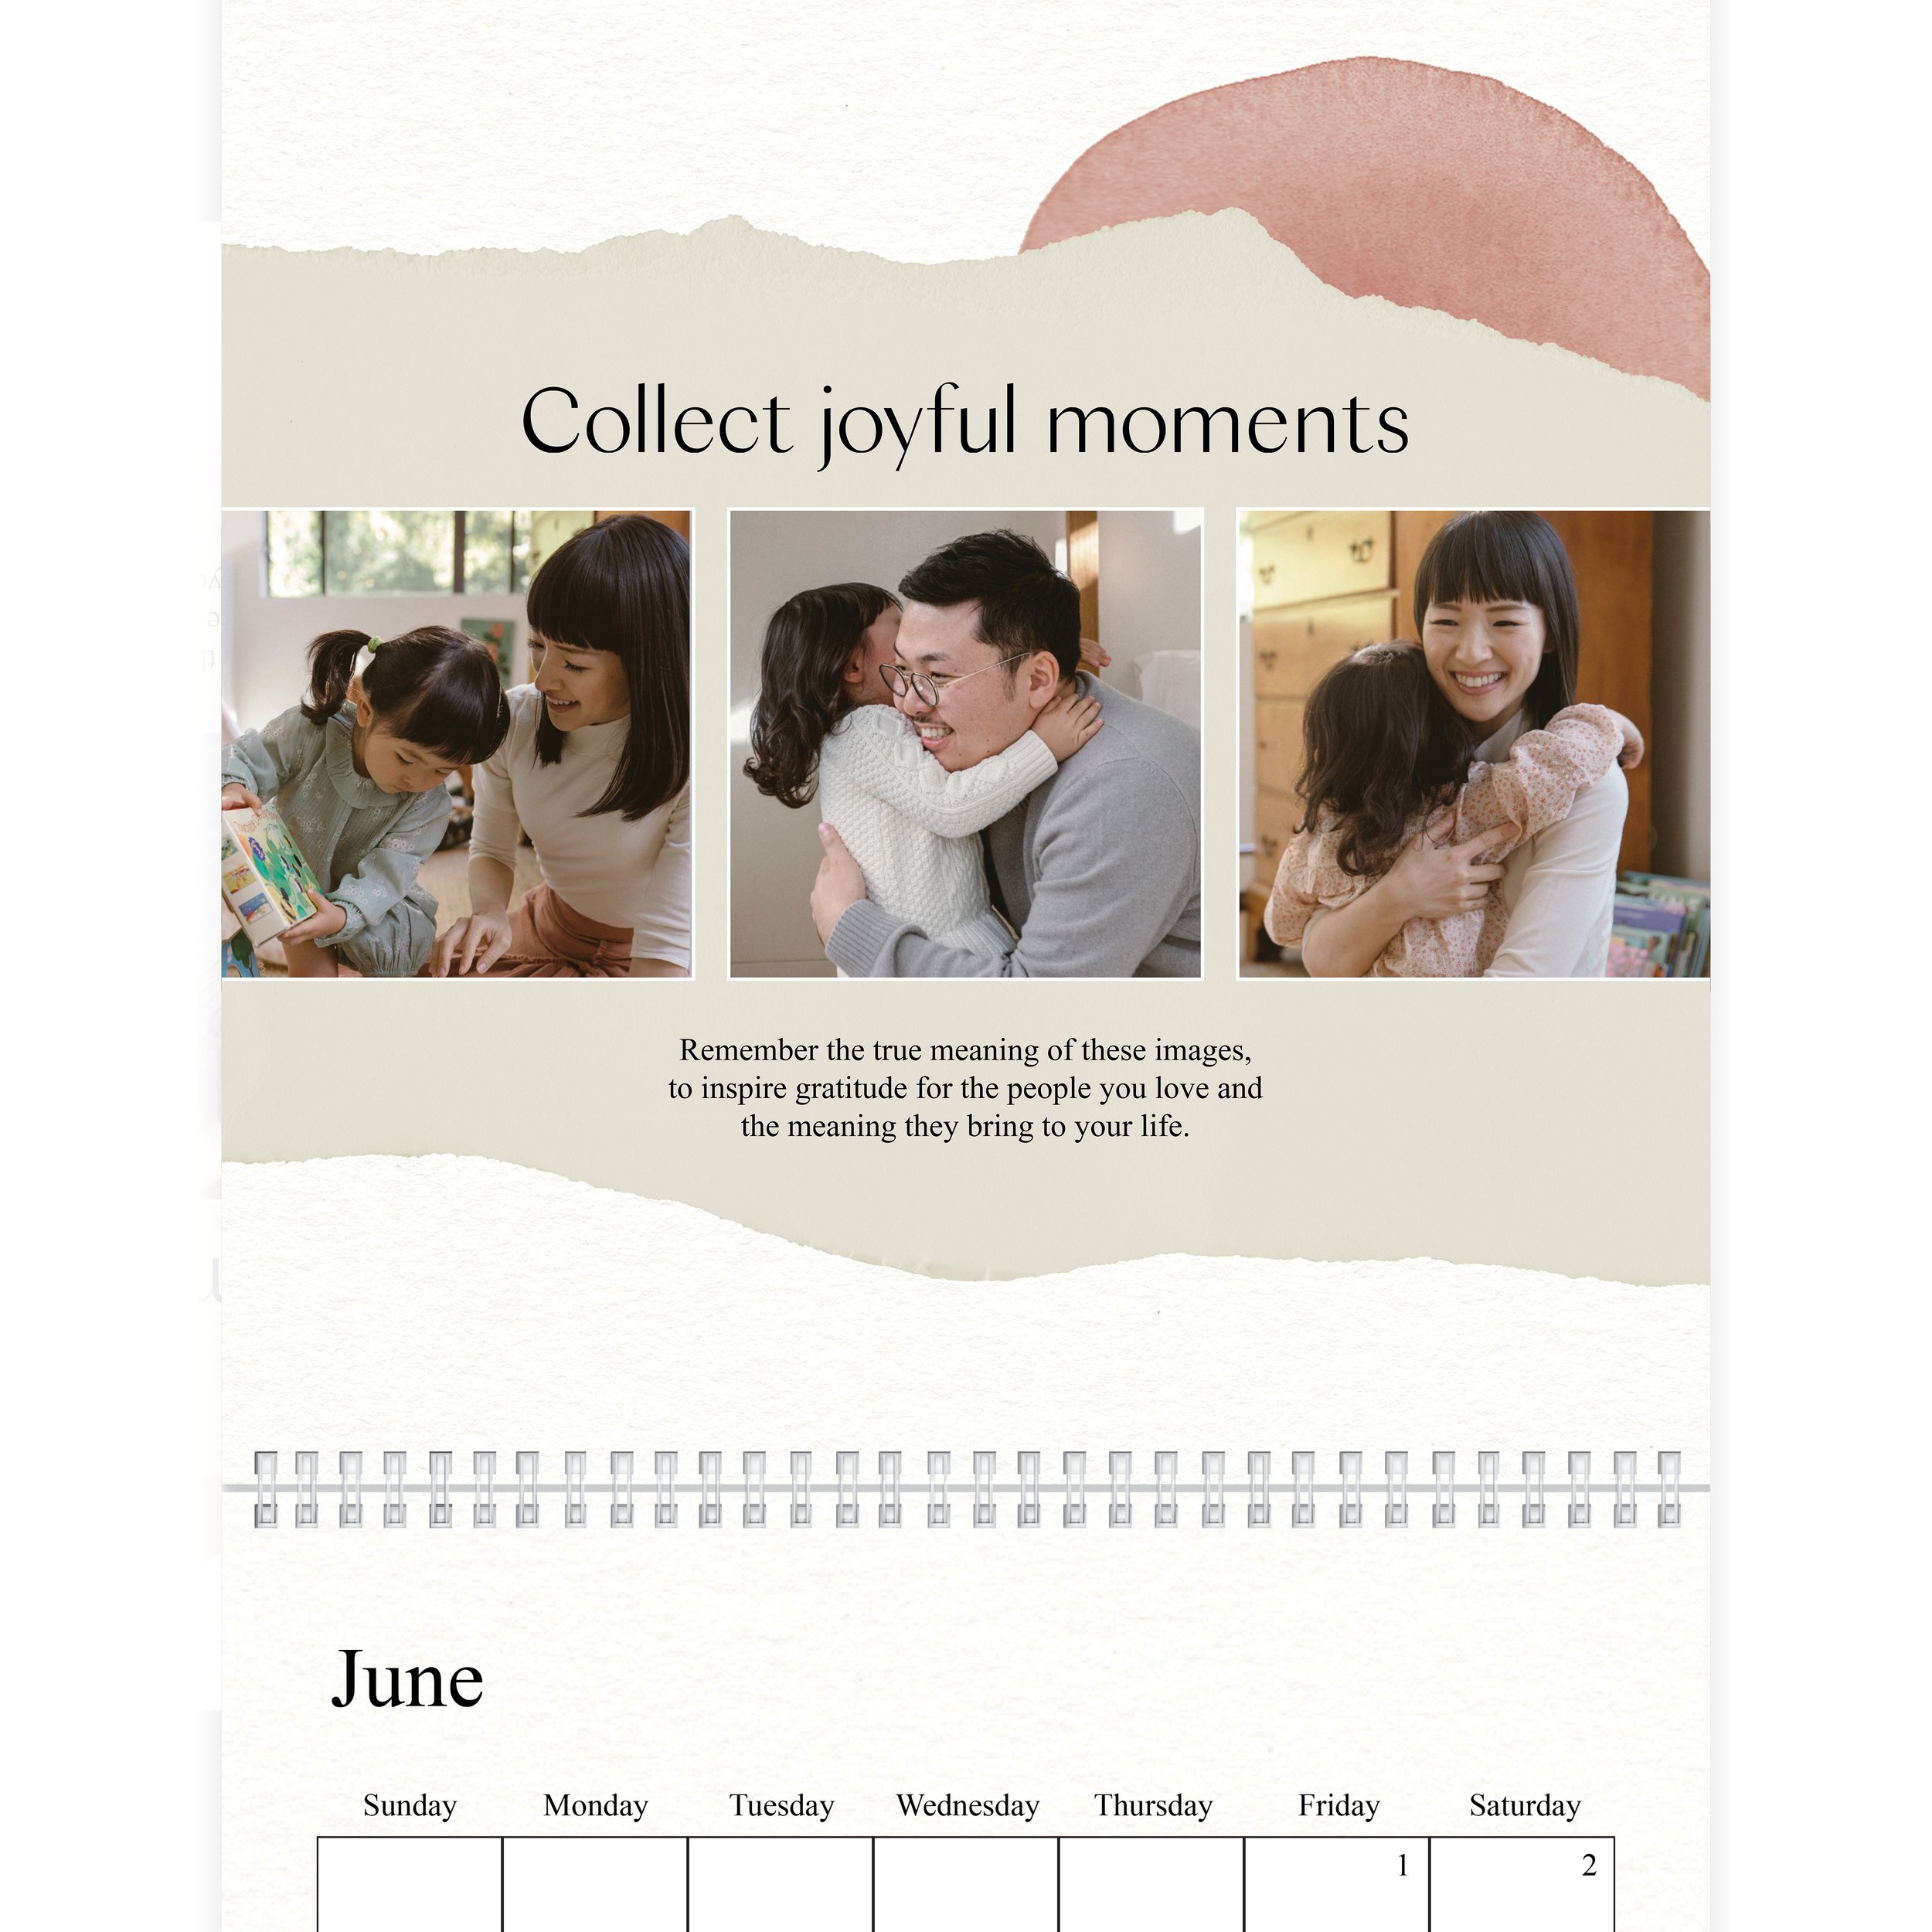 sq_moments-of-joy-by-marie-kondo-cal_sample_store-preview-01.jpg